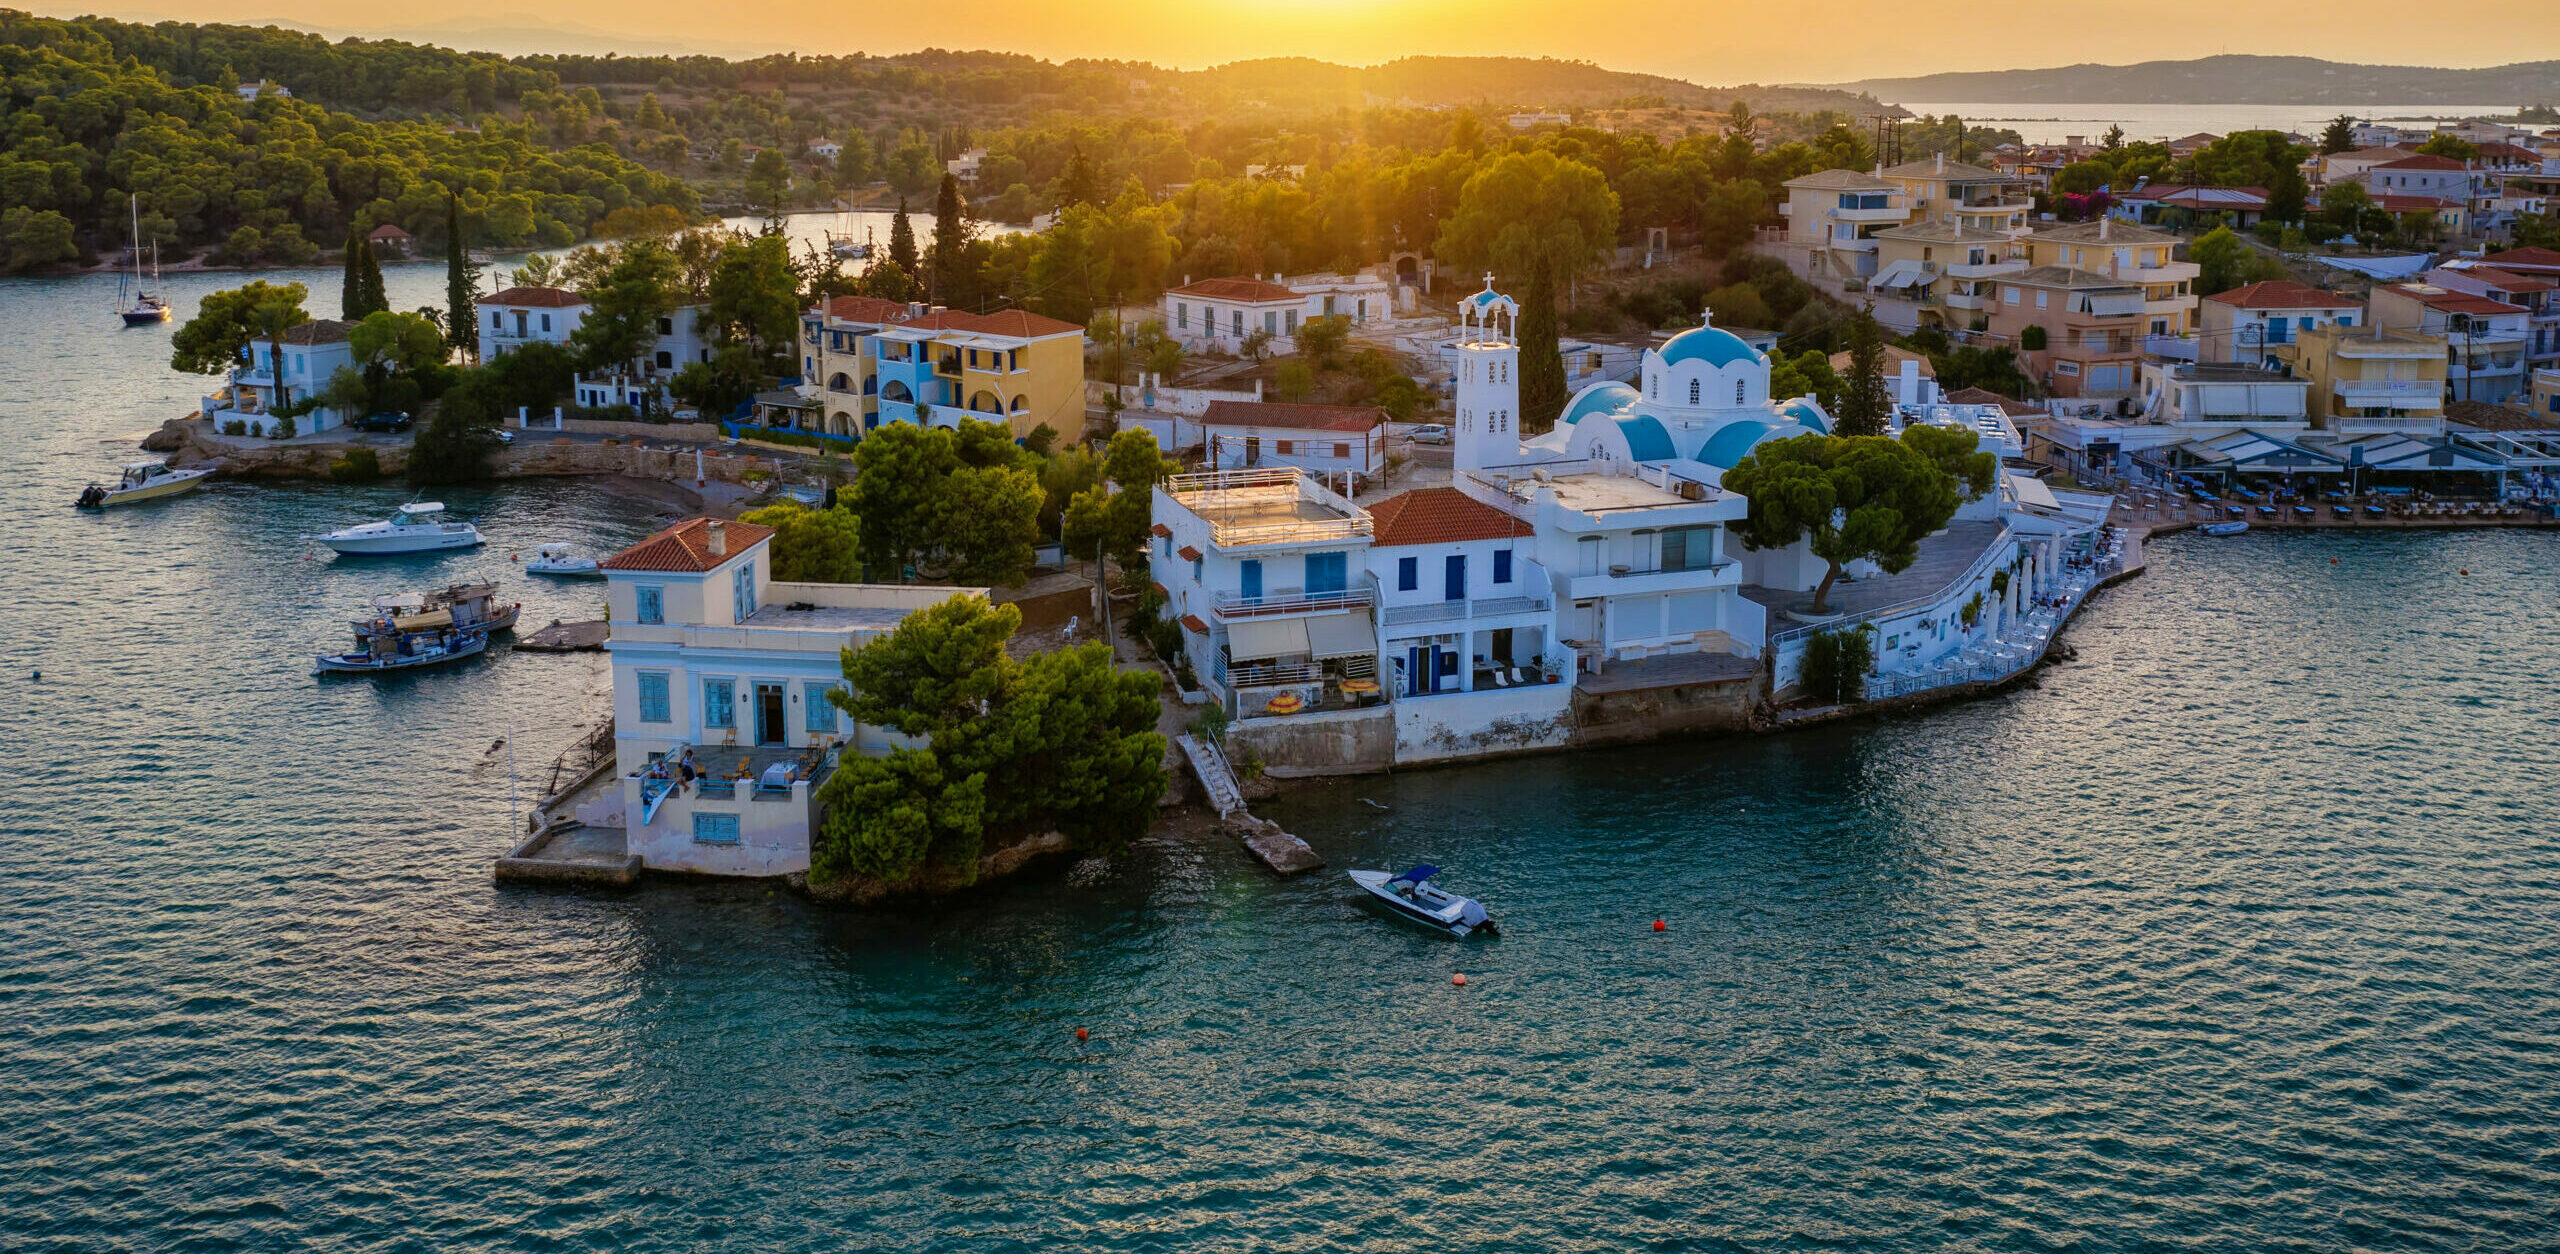 Porto Heli: check out the Riviera of the Peloponnese